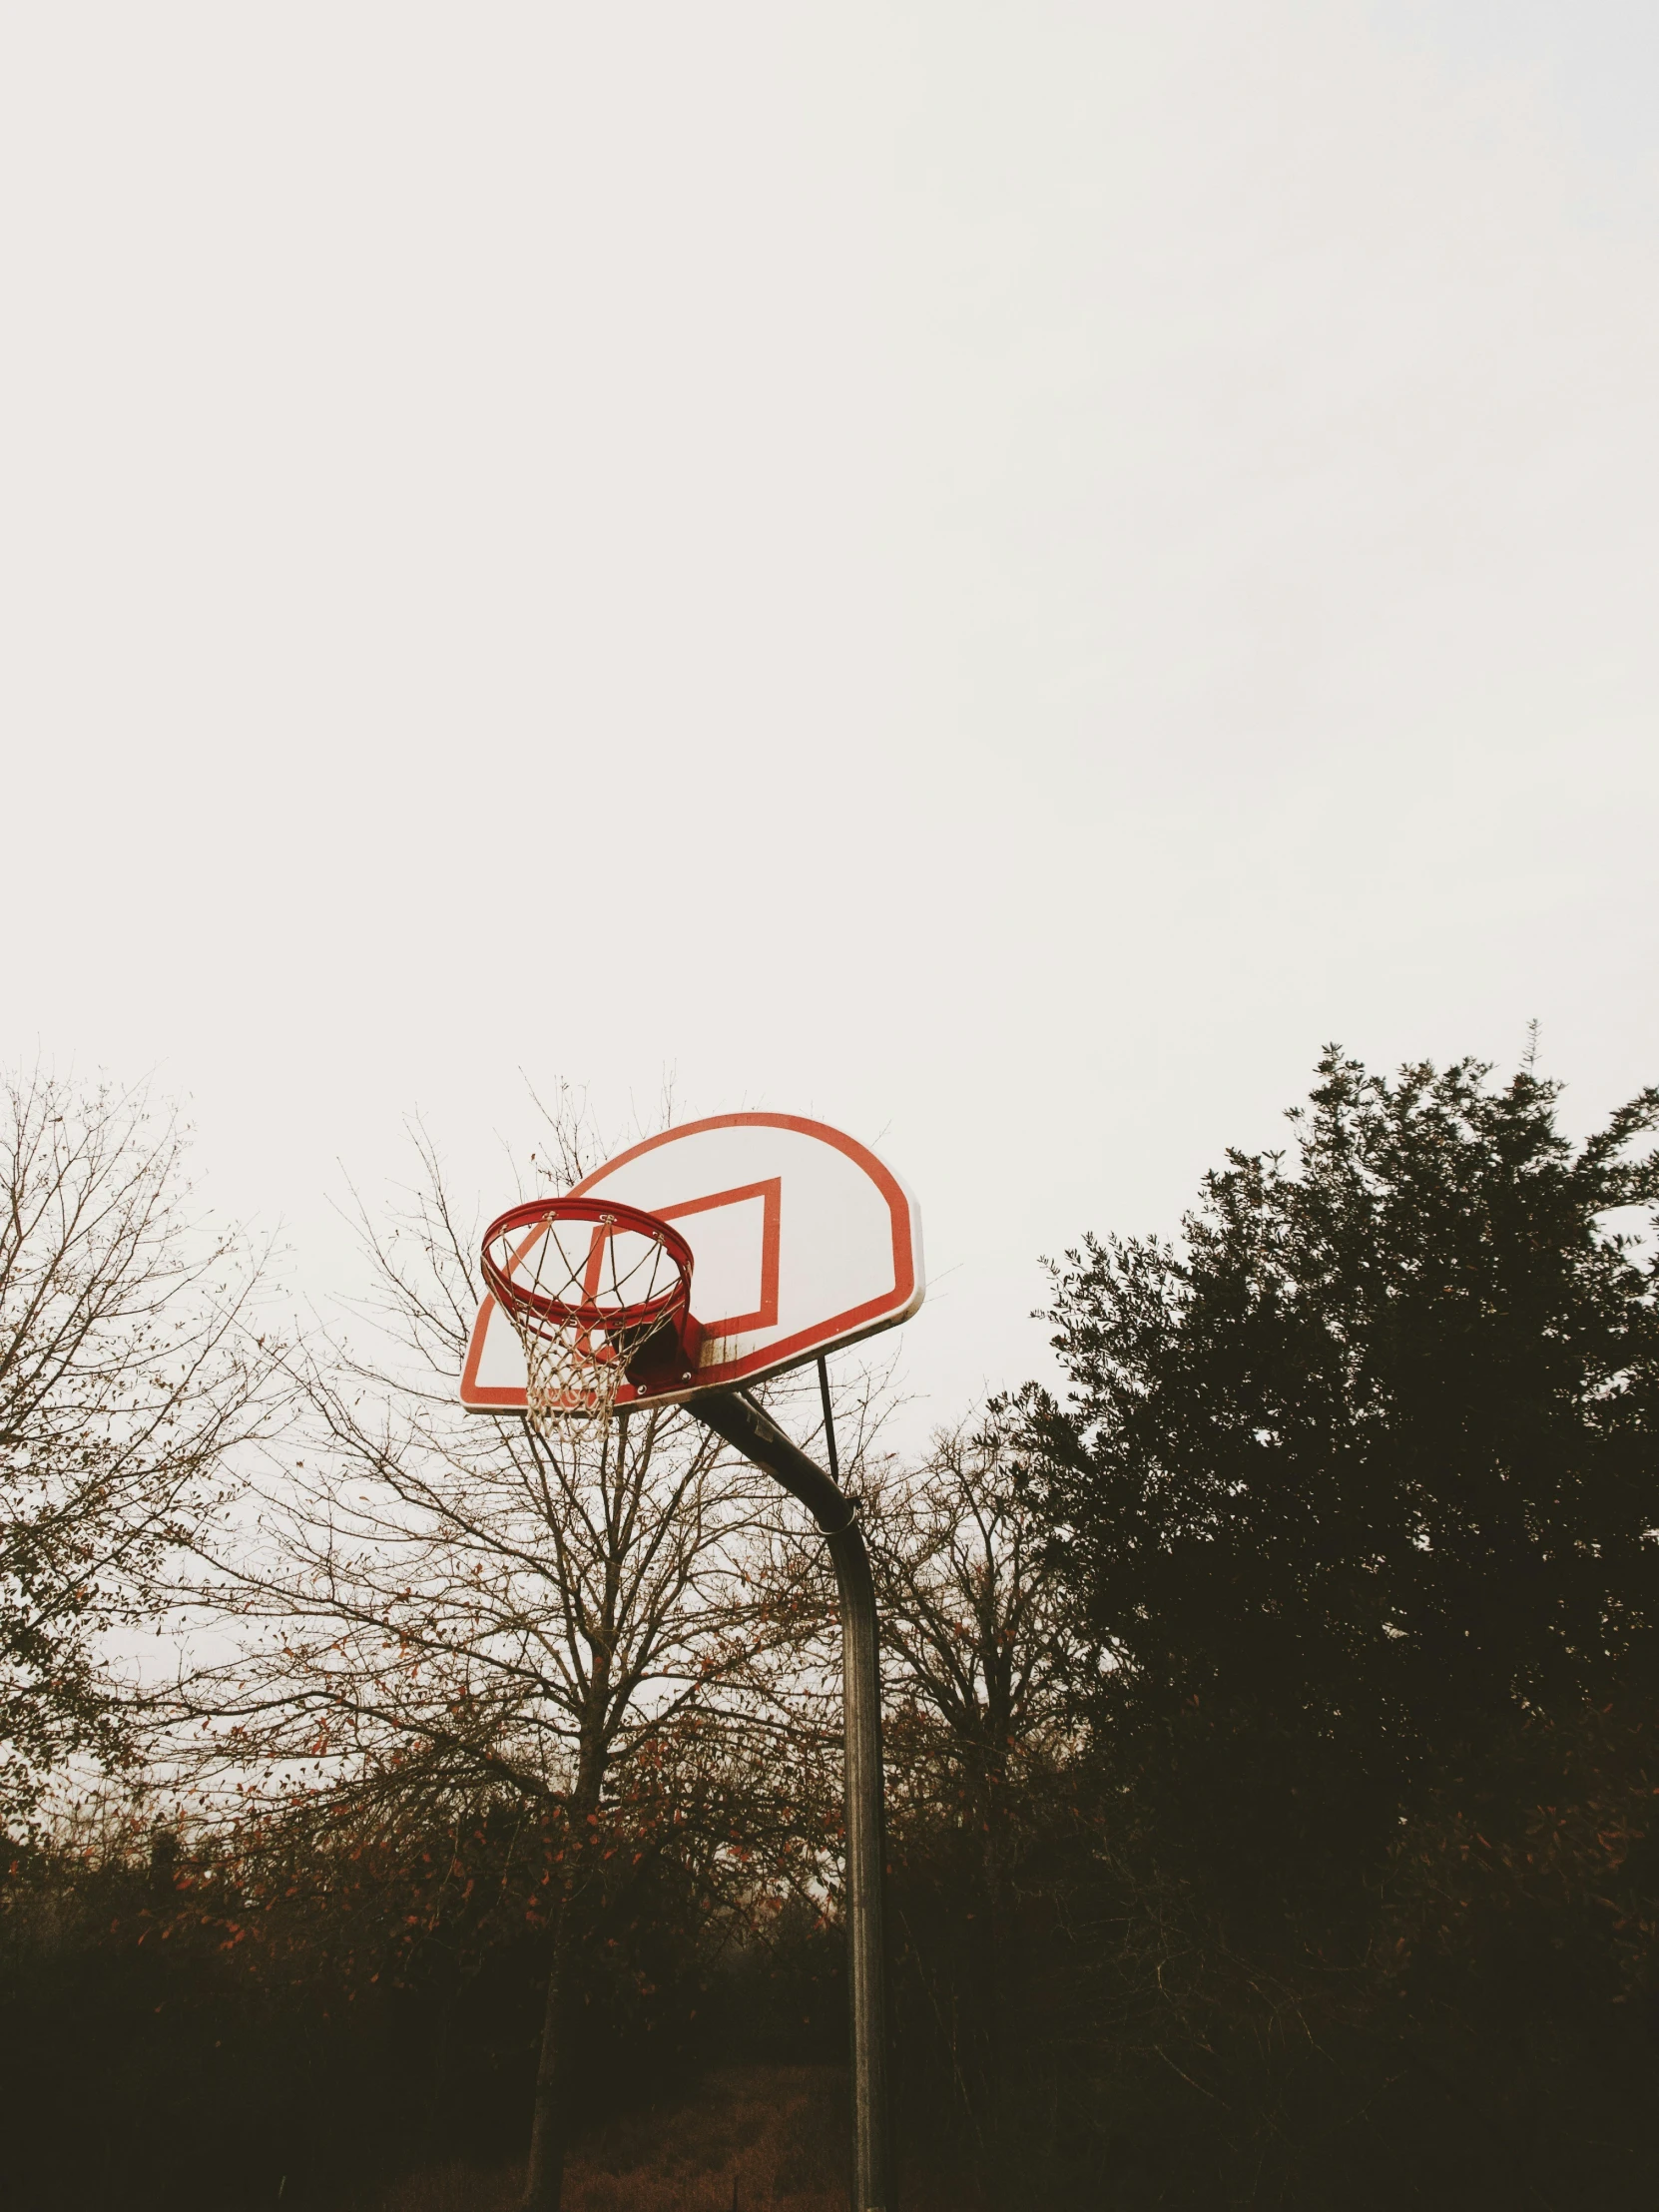 a basketball hoop against a sky with some trees in the foreground